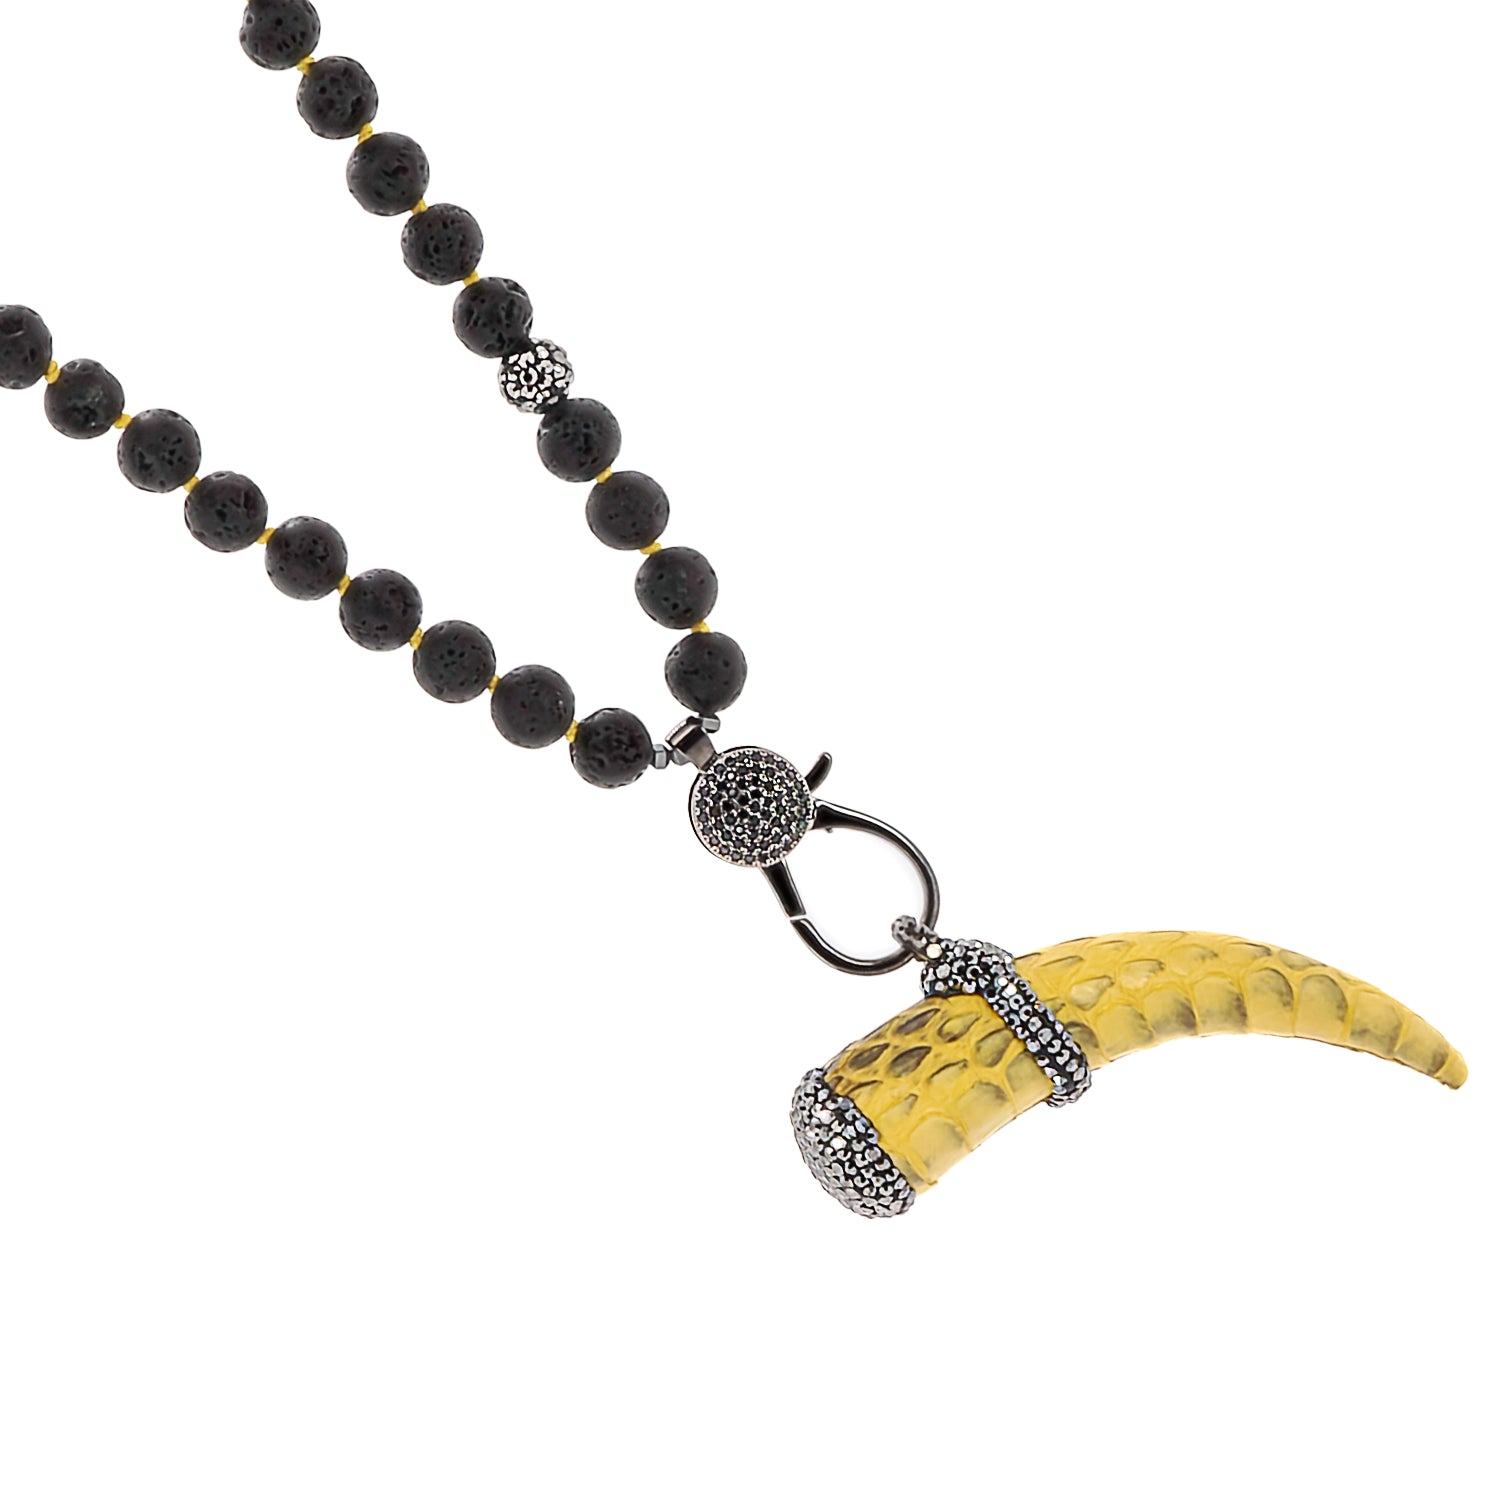 Lava rock stones, known for their grounding properties, creating a sense of strength and balance in the Spirit Cornicello Unique Necklace.